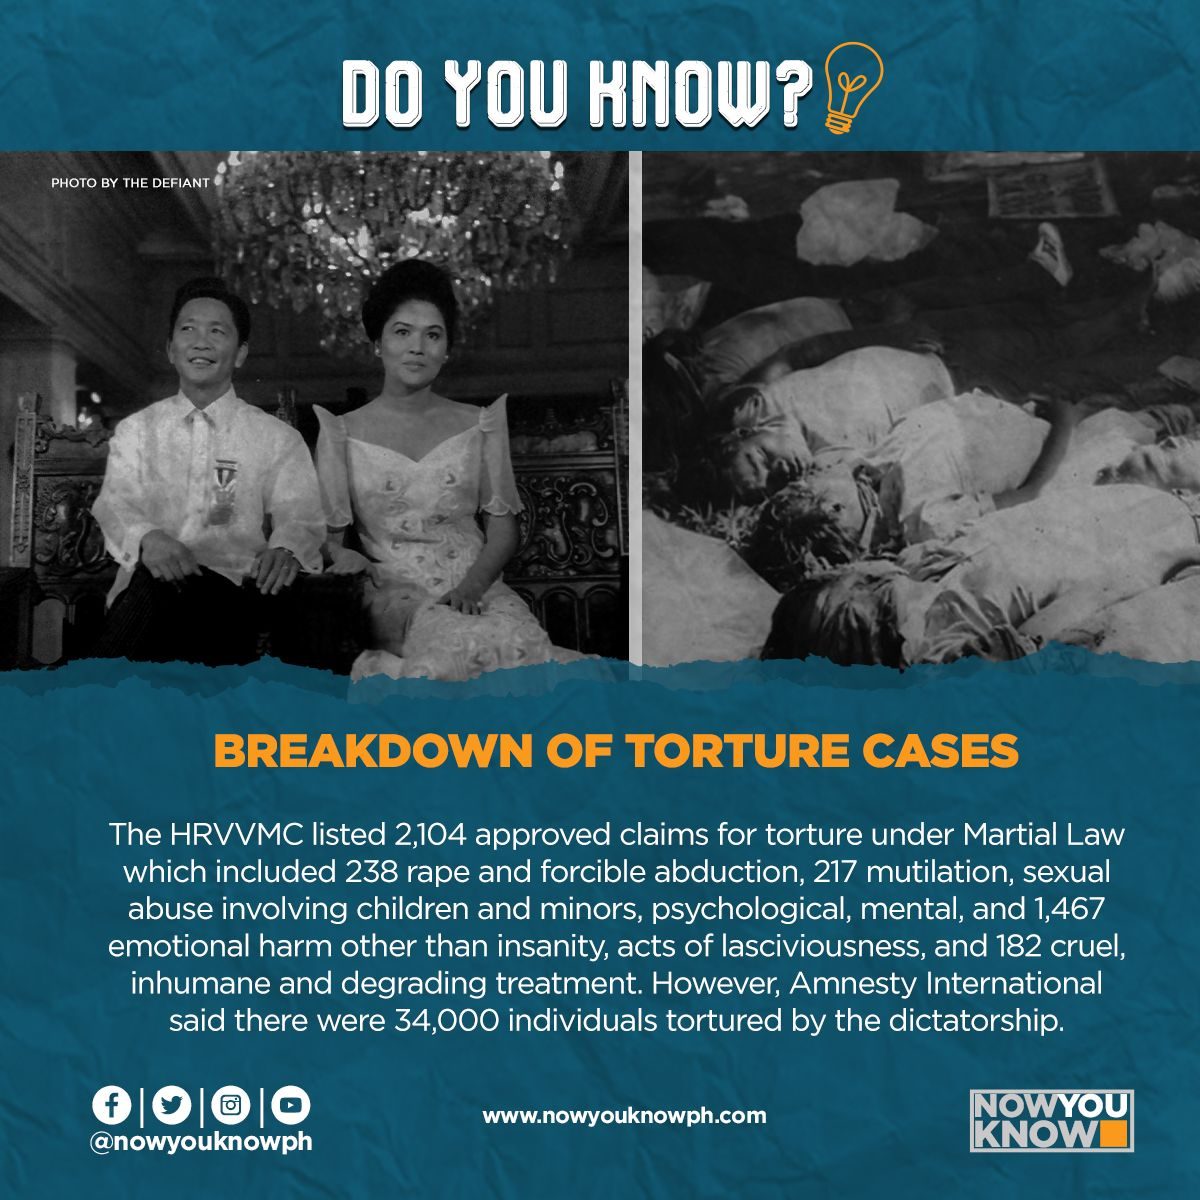 ML@50: Do you know about these human rights abuses during the Marcos dictatorship?